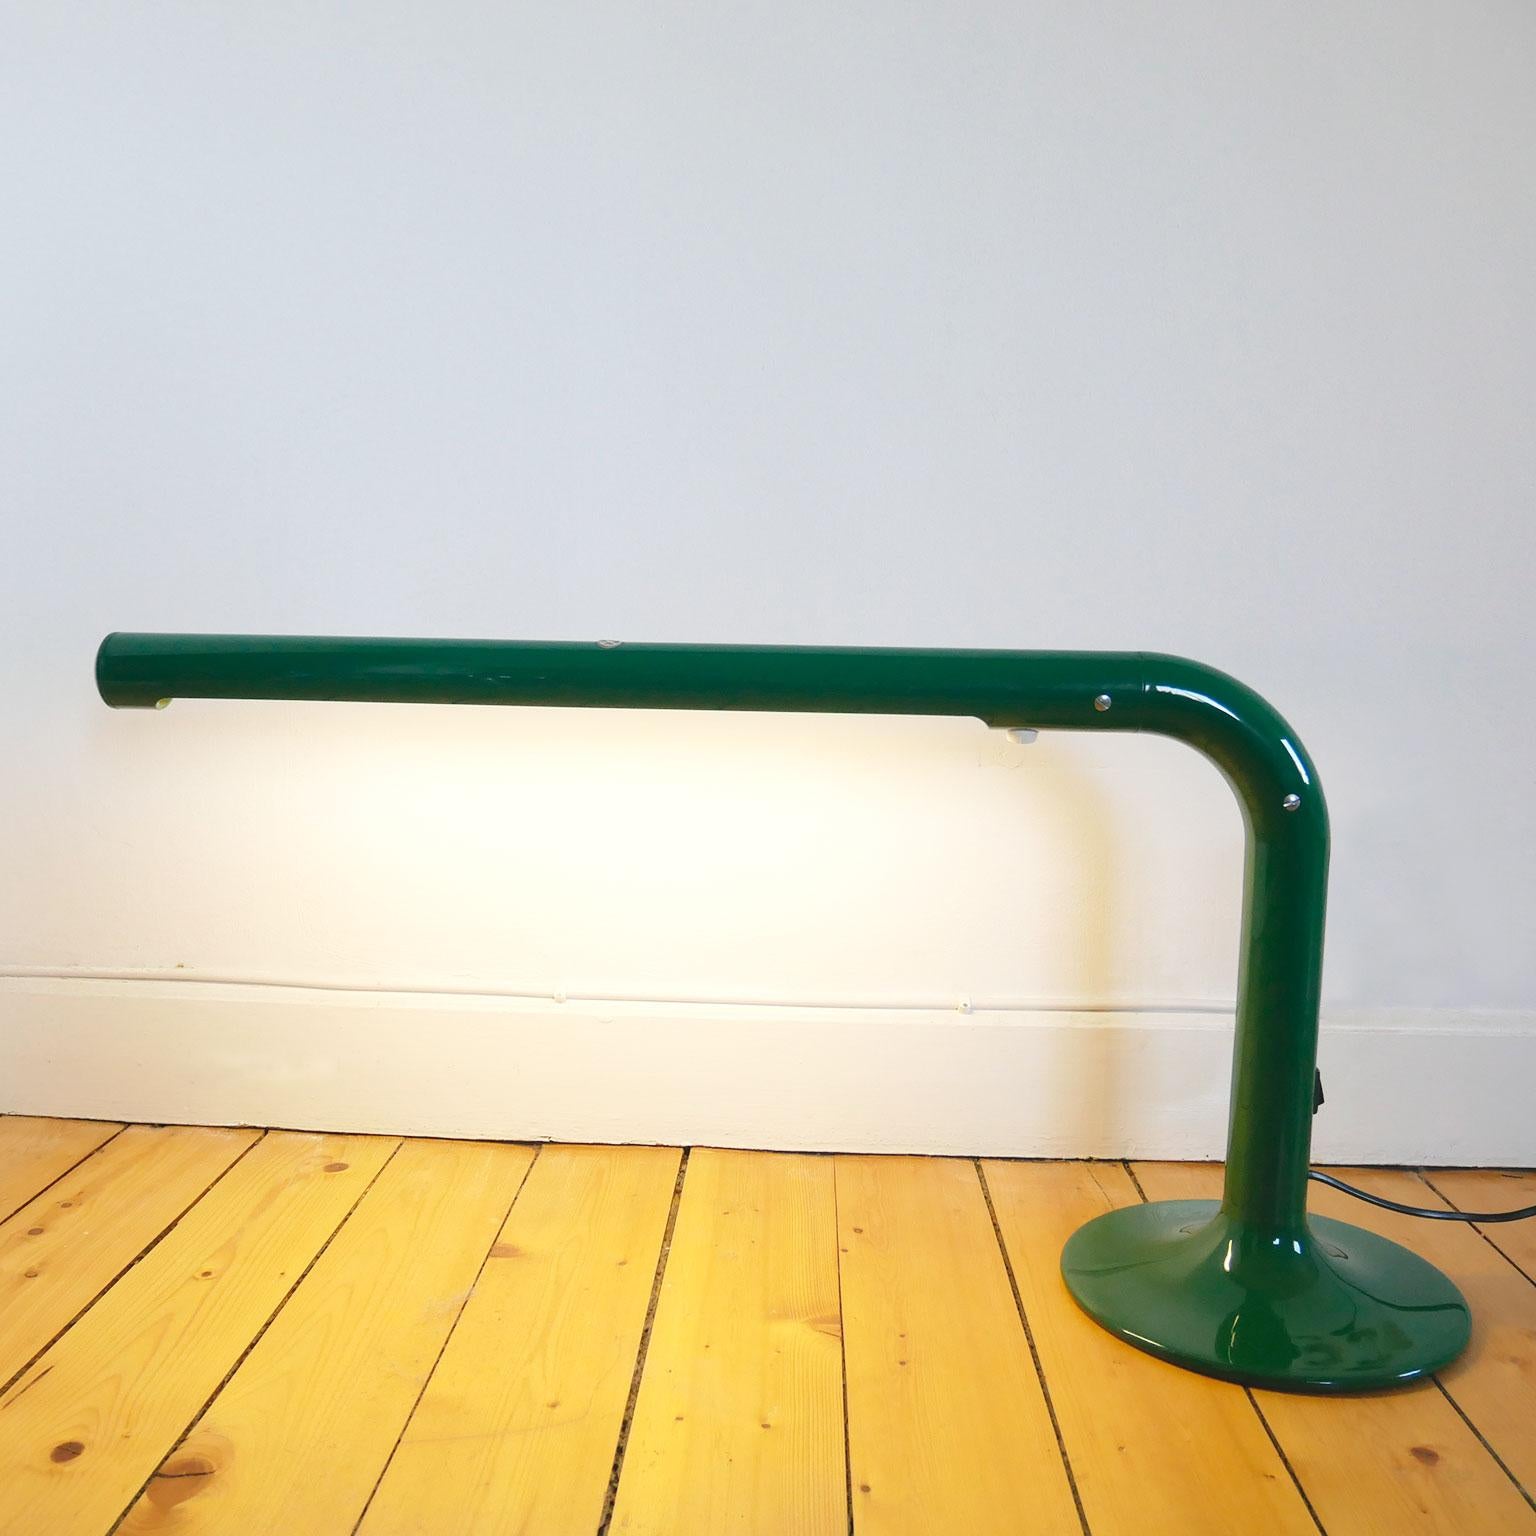 This piece is an Anders Pehrson tube lamp for Atelje Lykthan. This lamp is from the 1960s and is in working condition.